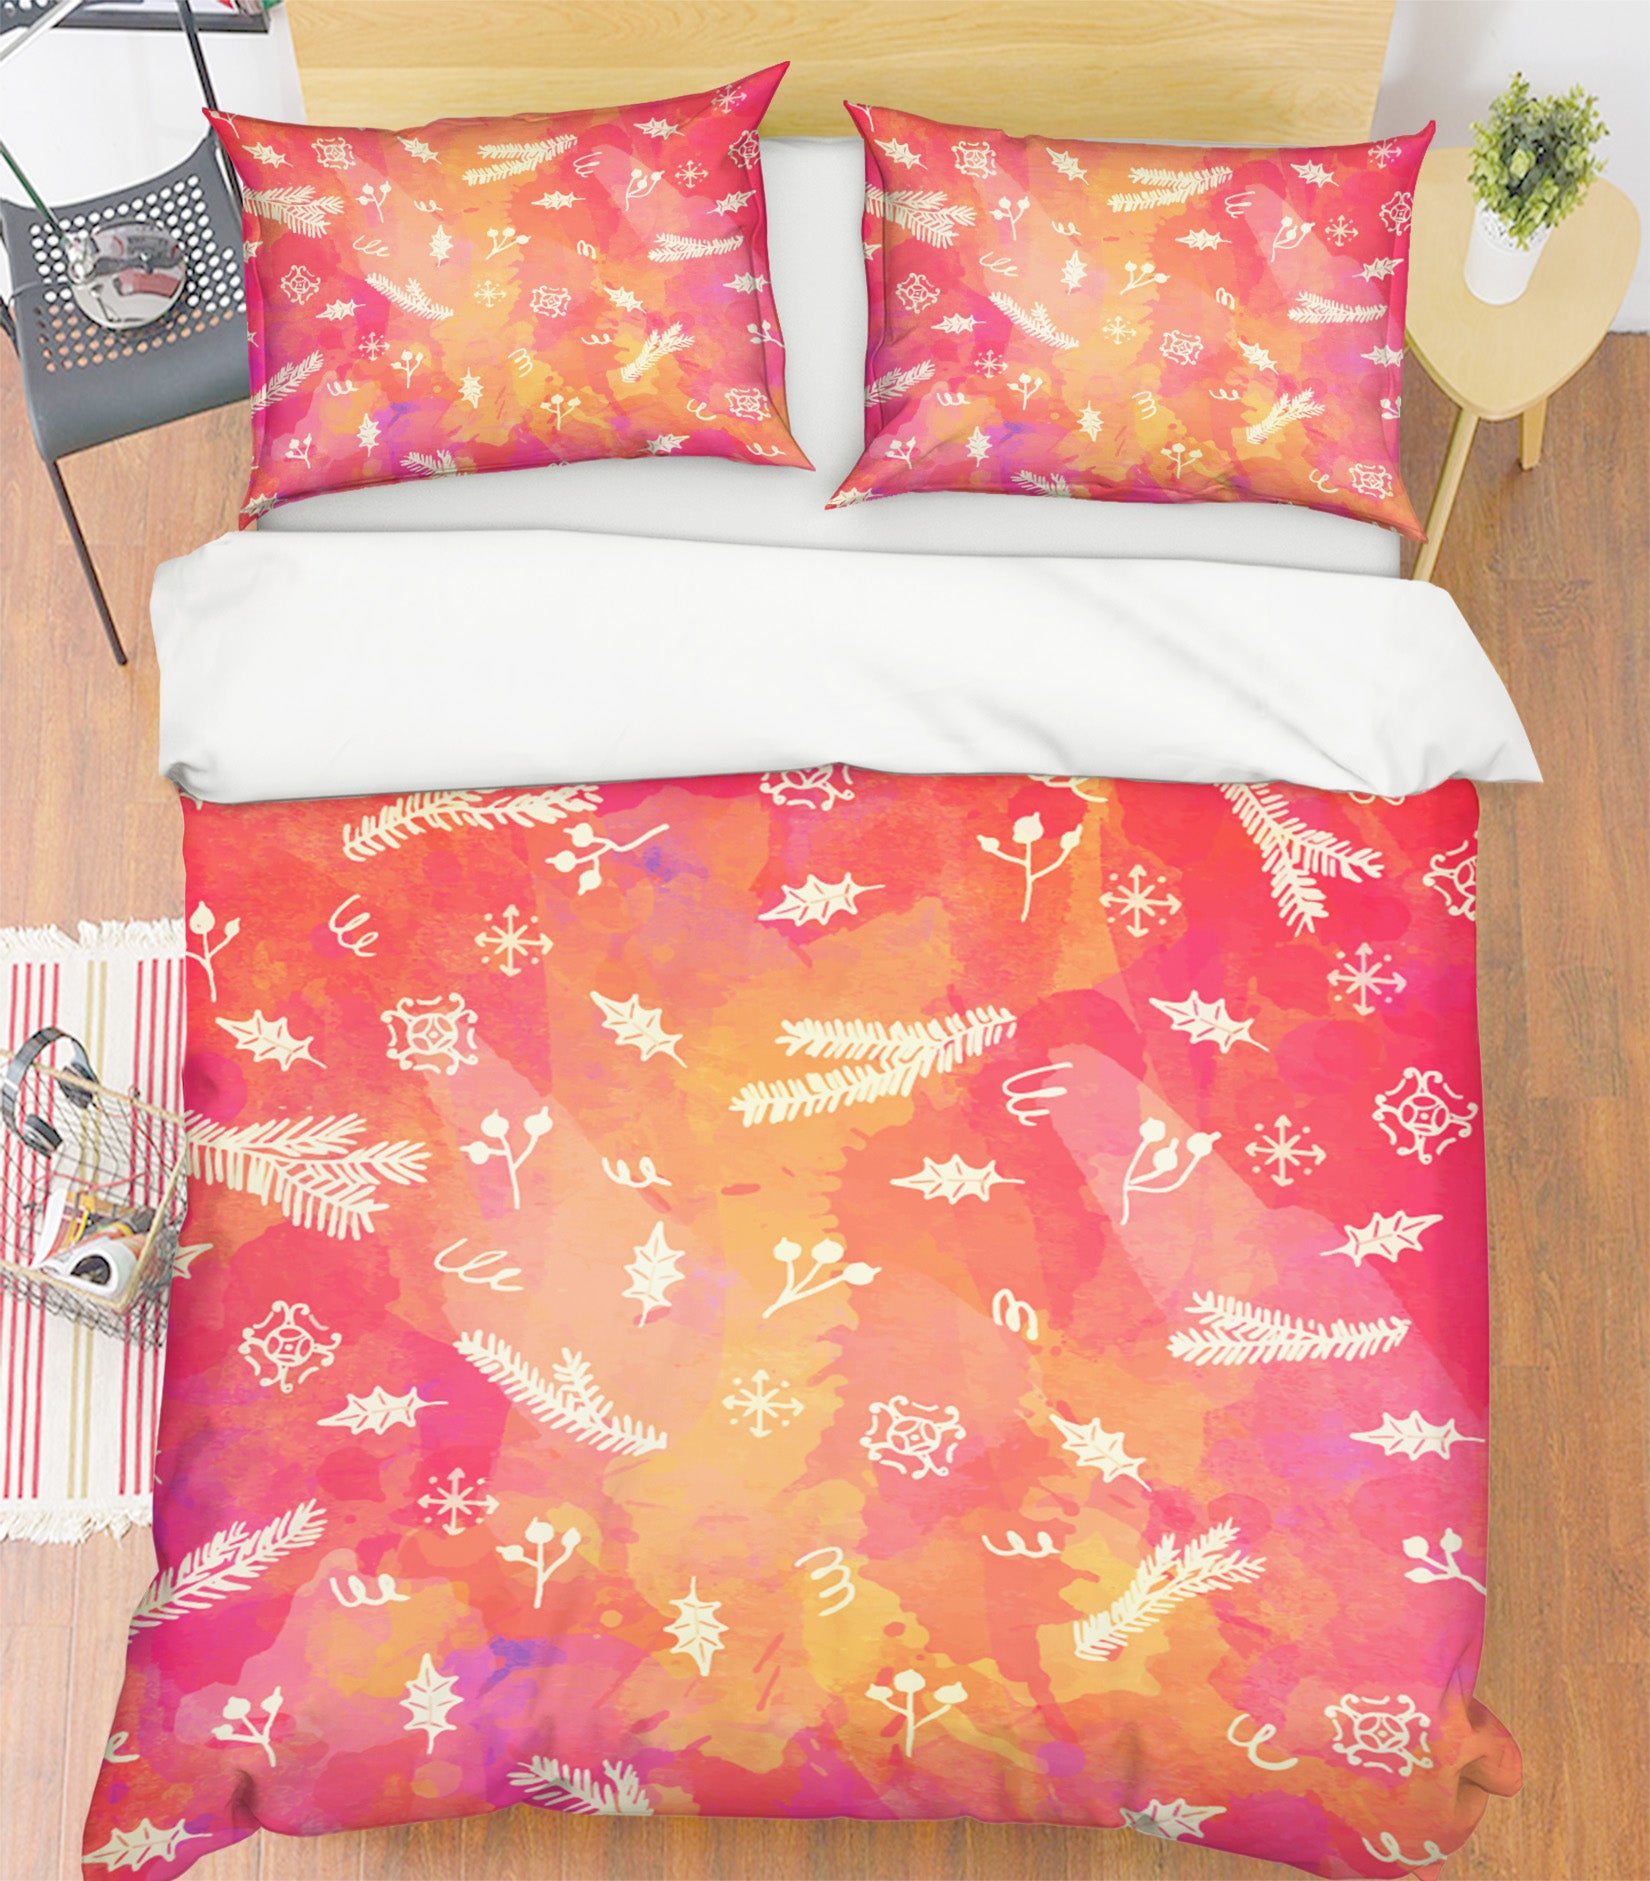 3D Pink Pattern 45019 Christmas Quilt Duvet Cover Xmas Bed Pillowcases